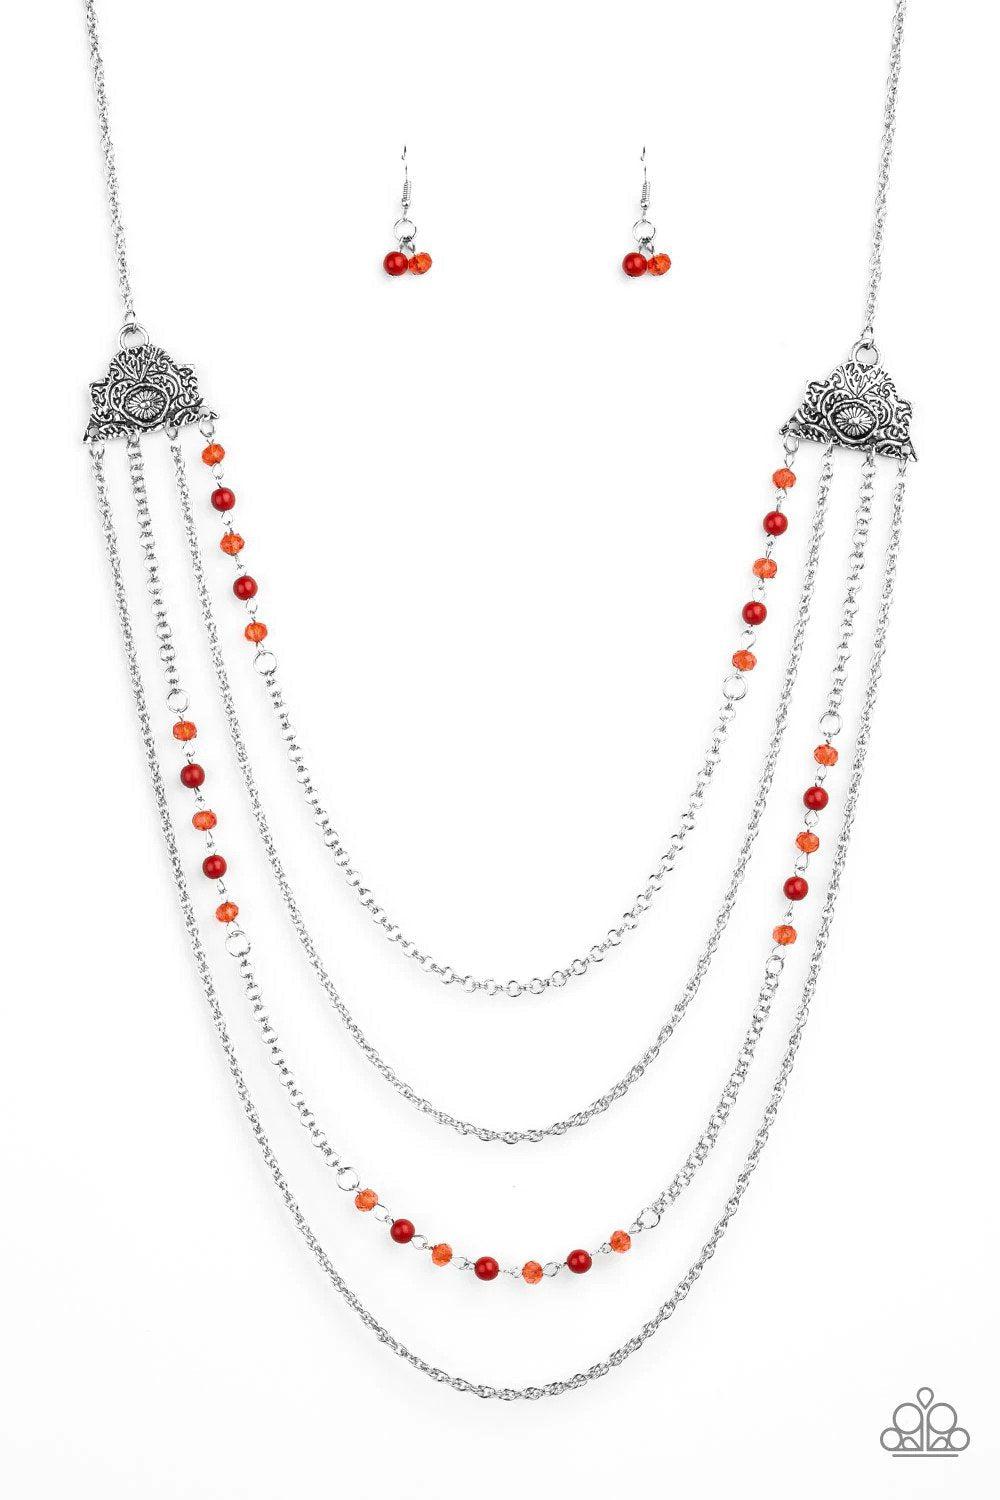 Pharaoh Finesse Red Necklace - Paparazzi Accessories- lightbox - CarasShop.com - $5 Jewelry by Cara Jewels